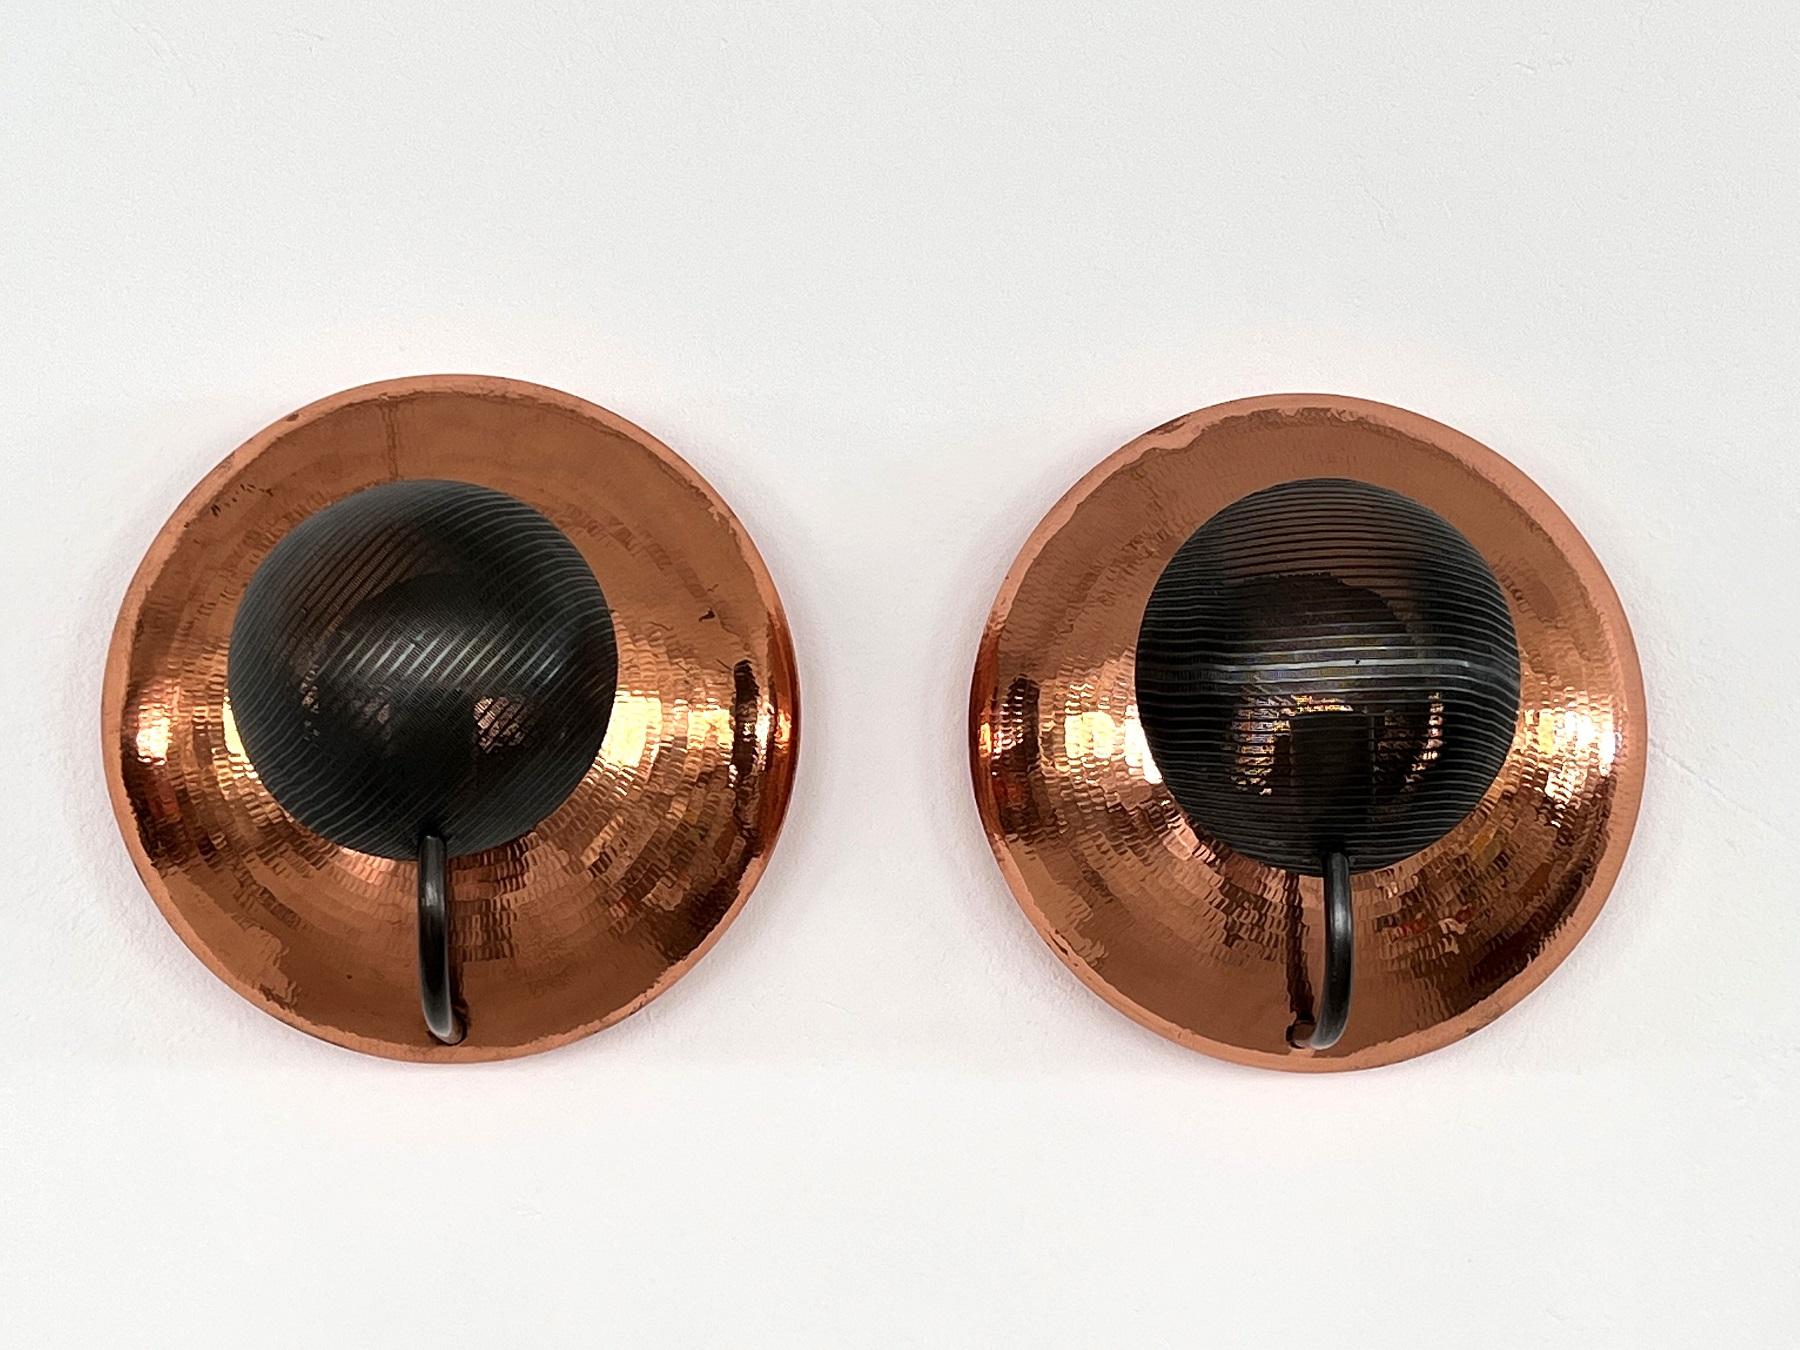 Beautiful and particular pair of wall sconces, made of hammered copper and perforated black metal.
Made in Italy in the 1970s.
Both are hollow inside, with a domed shape.
The black metal arms that curve and end in front of the lamps with a